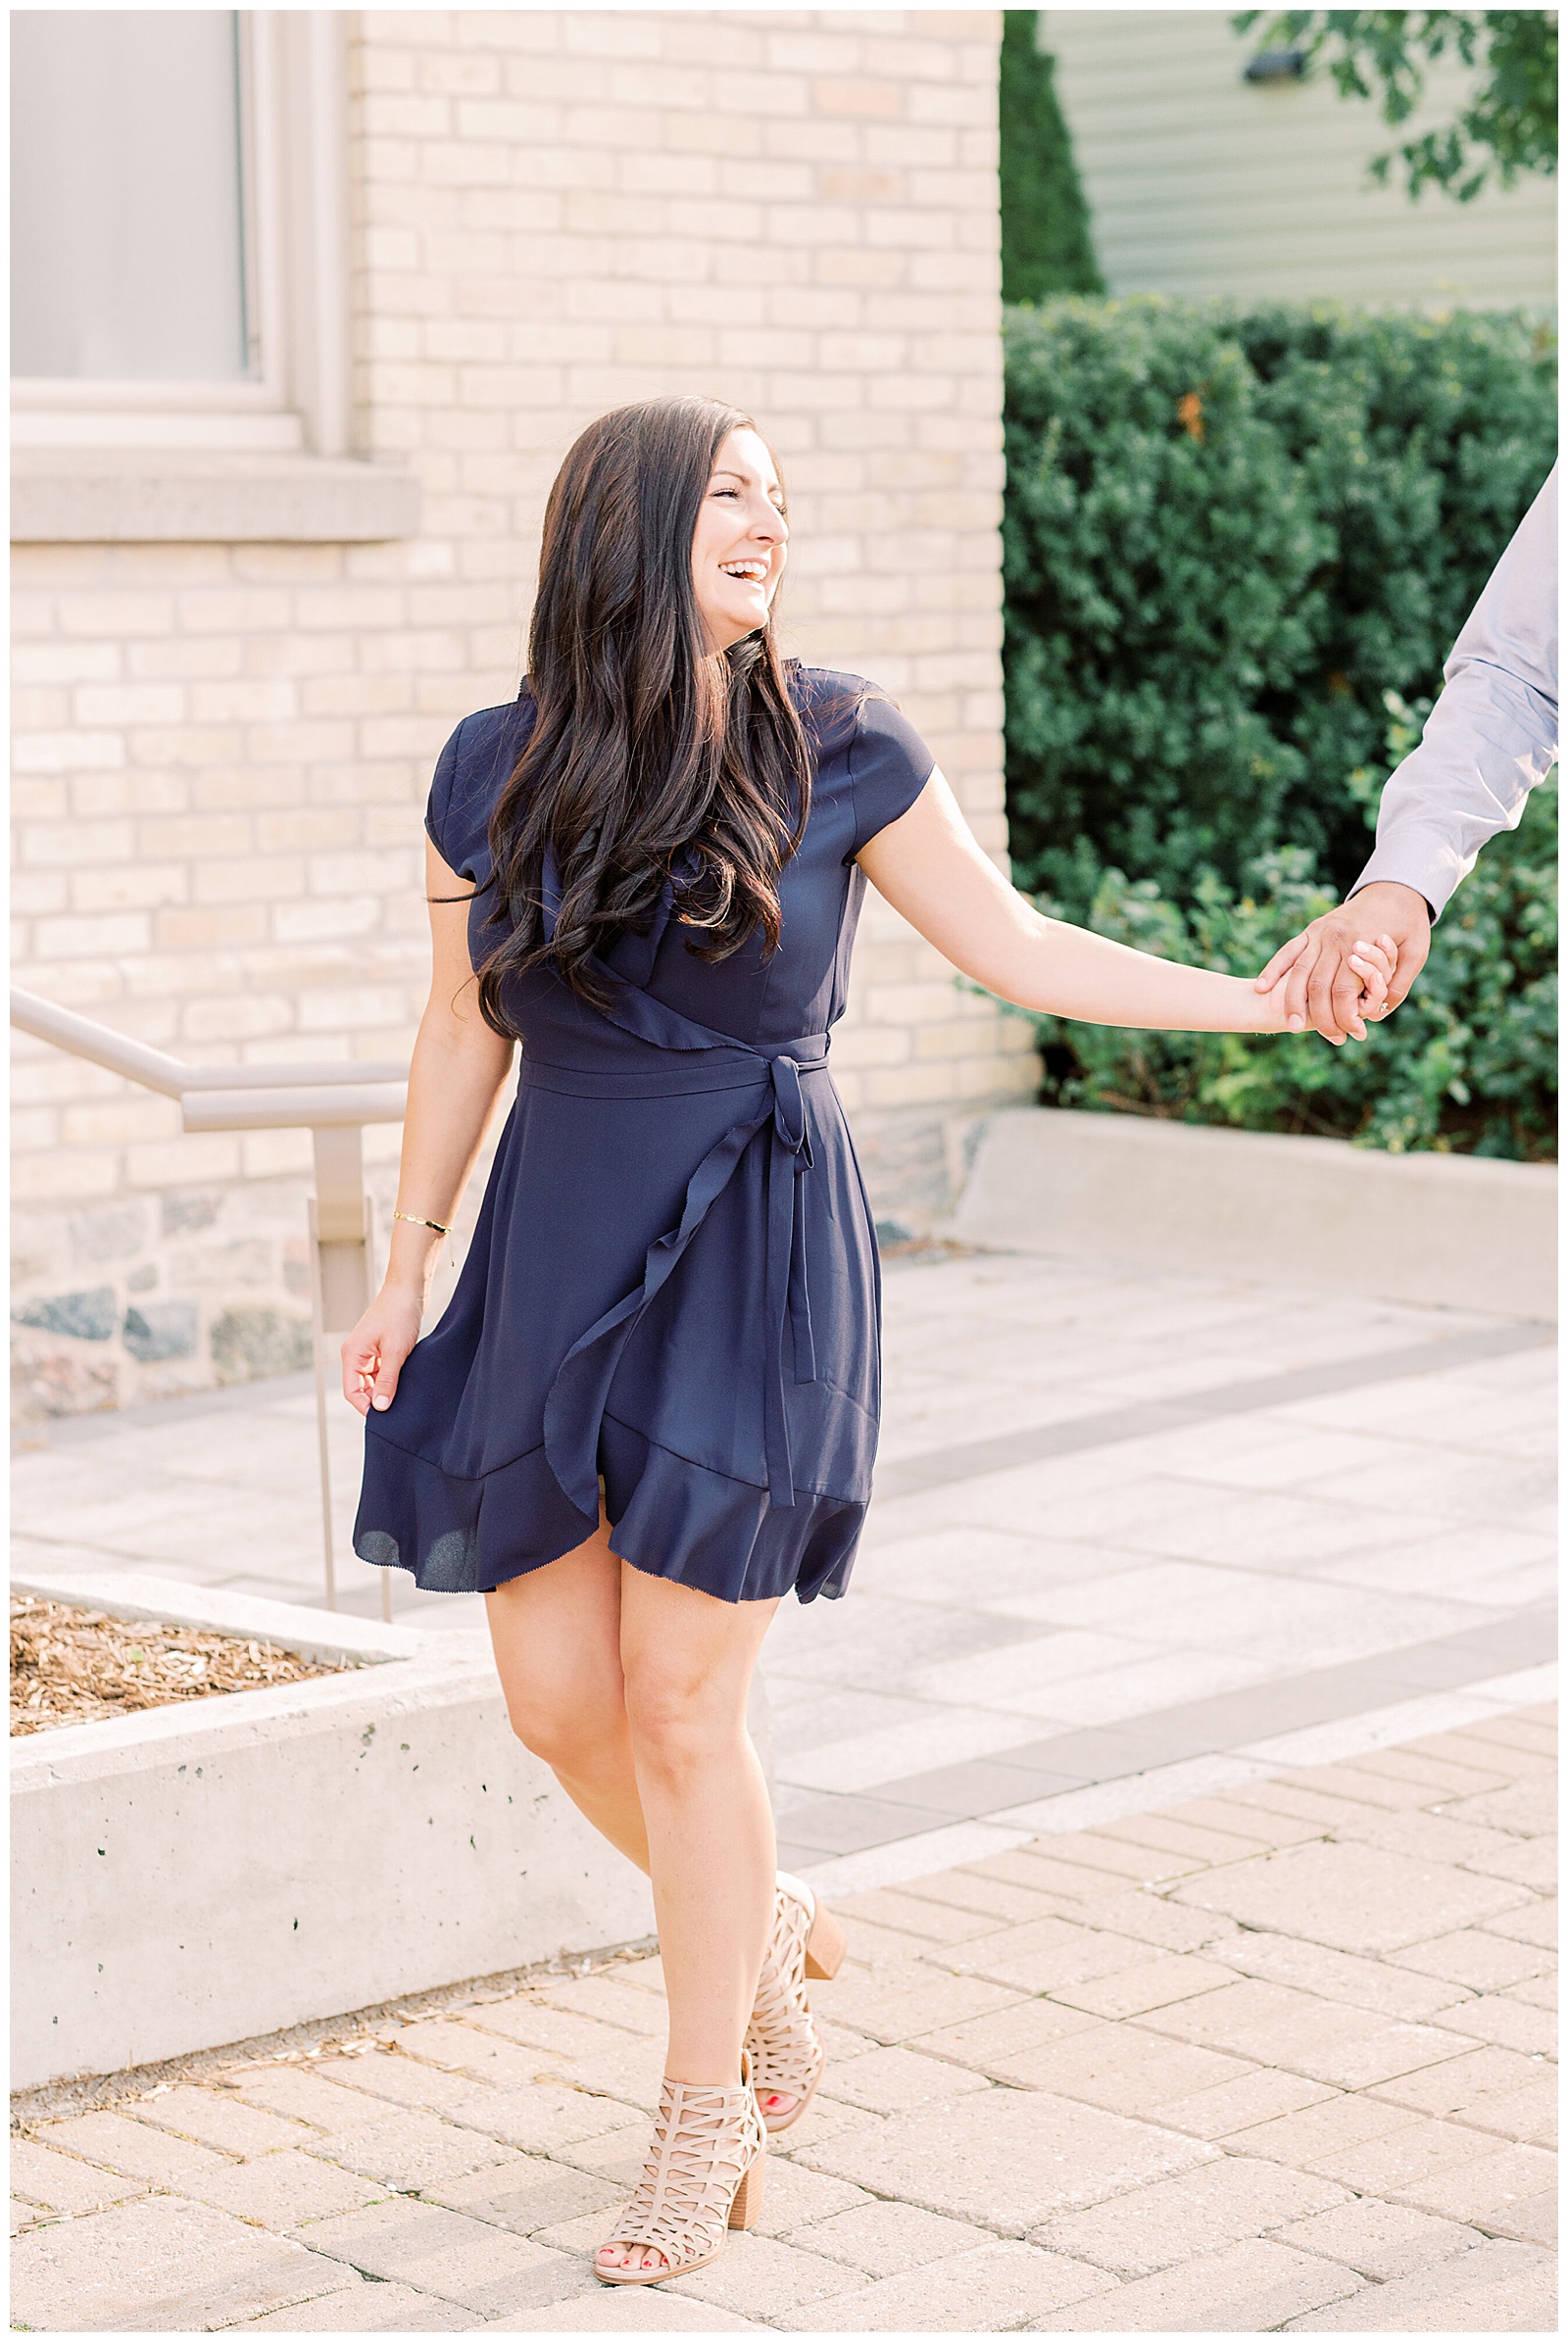 Woman laughing and holding husband's hand while walking